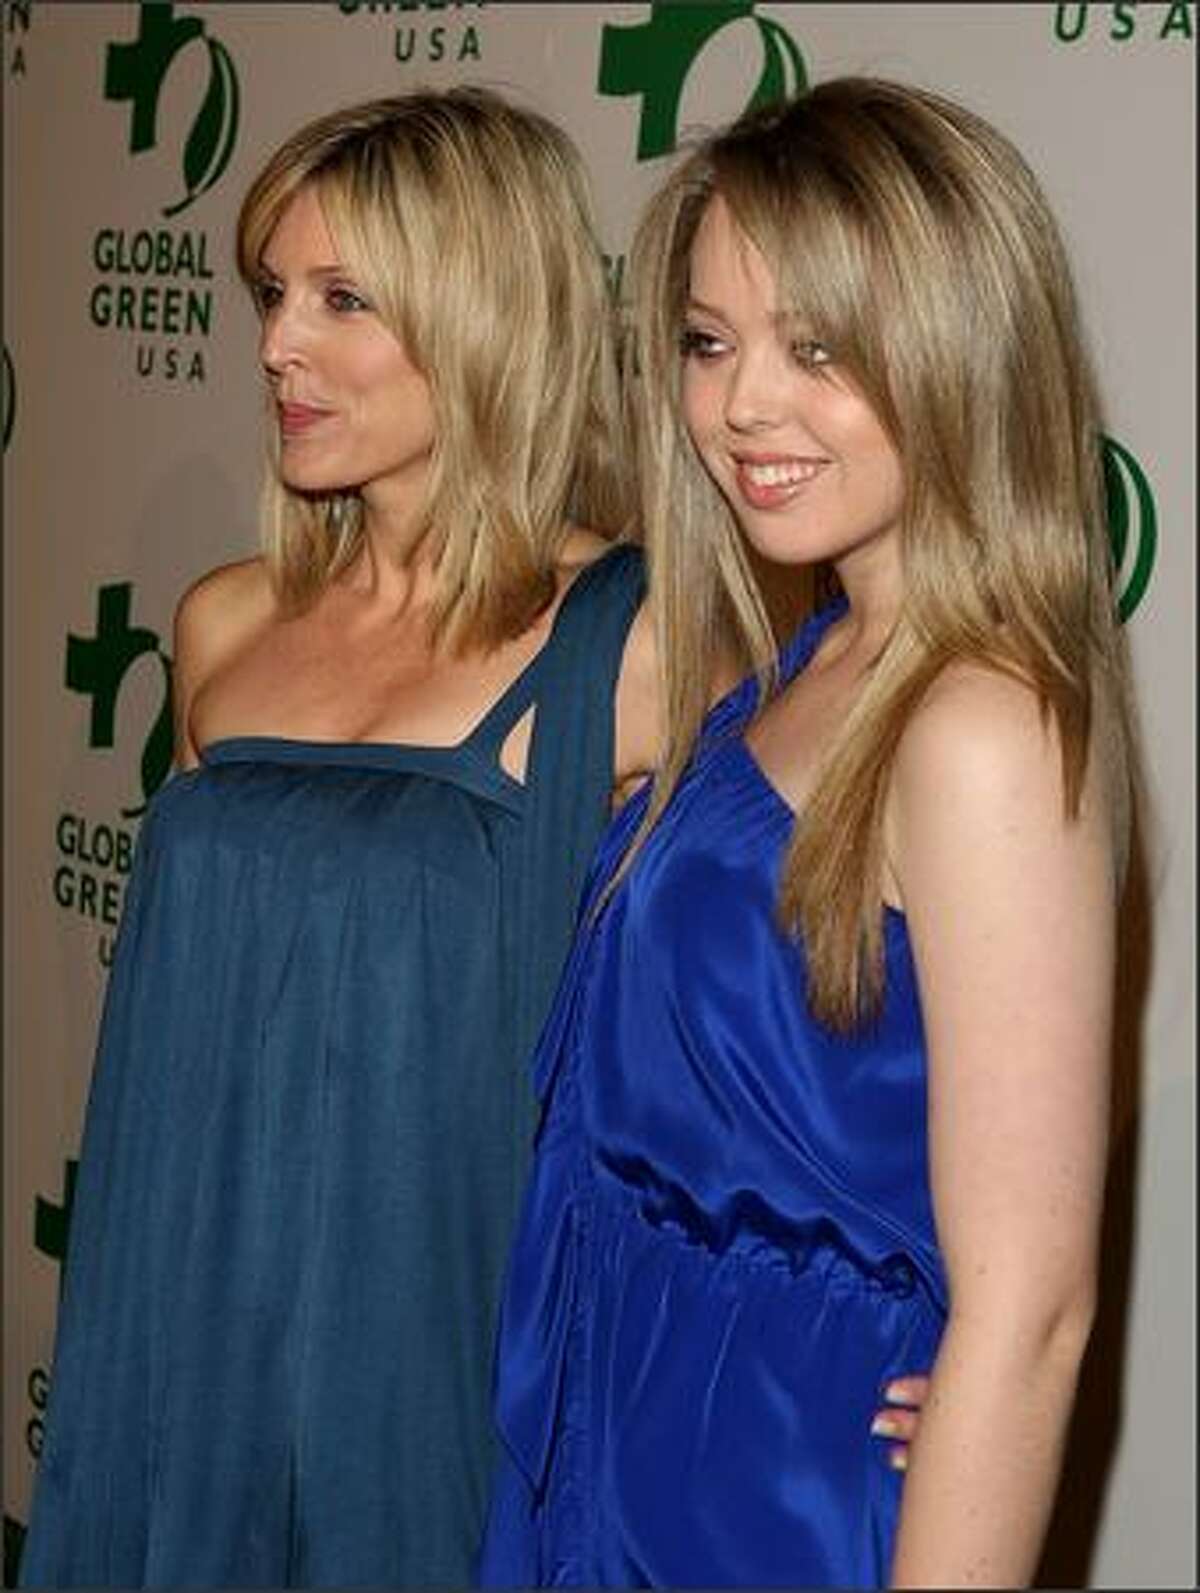 Socialite Marla Maples and Tiffany Trump arrive at Global Green USA's 6th Annual Pre-Oscar Party held at Avalon Hollwood in Hollywood, California.